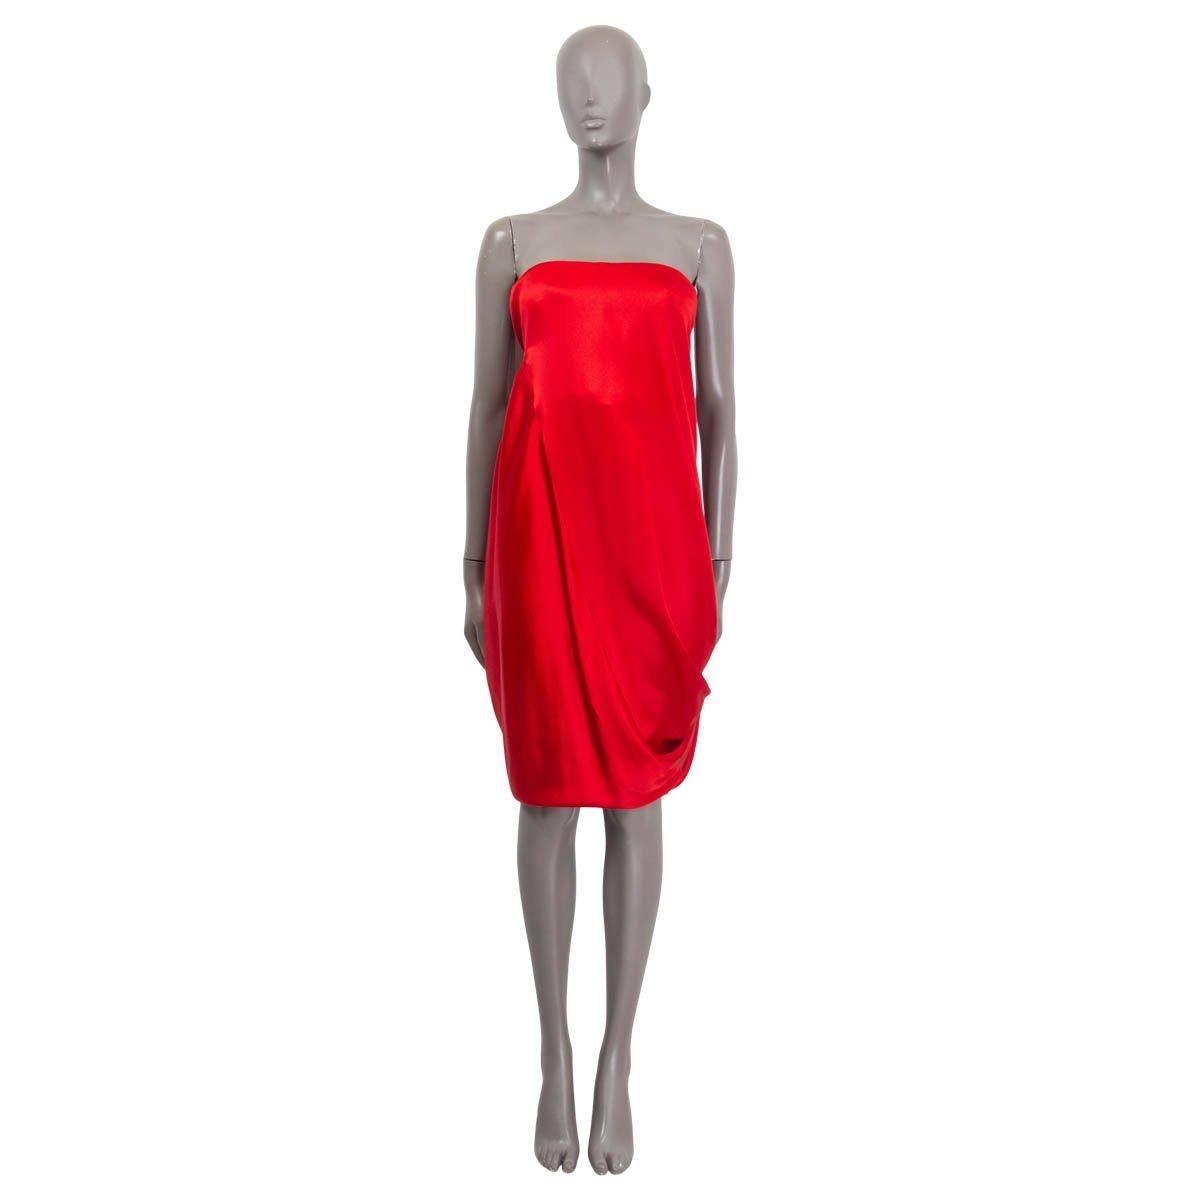 100% authentic Alexander McQueen draped strapless dress in red silk (100%). Opens with a concealed zipper and a hook on the back. Corset structure underneath. Has a pulled thread on the back otherwise in excellent condition. 

Measurements
Tag